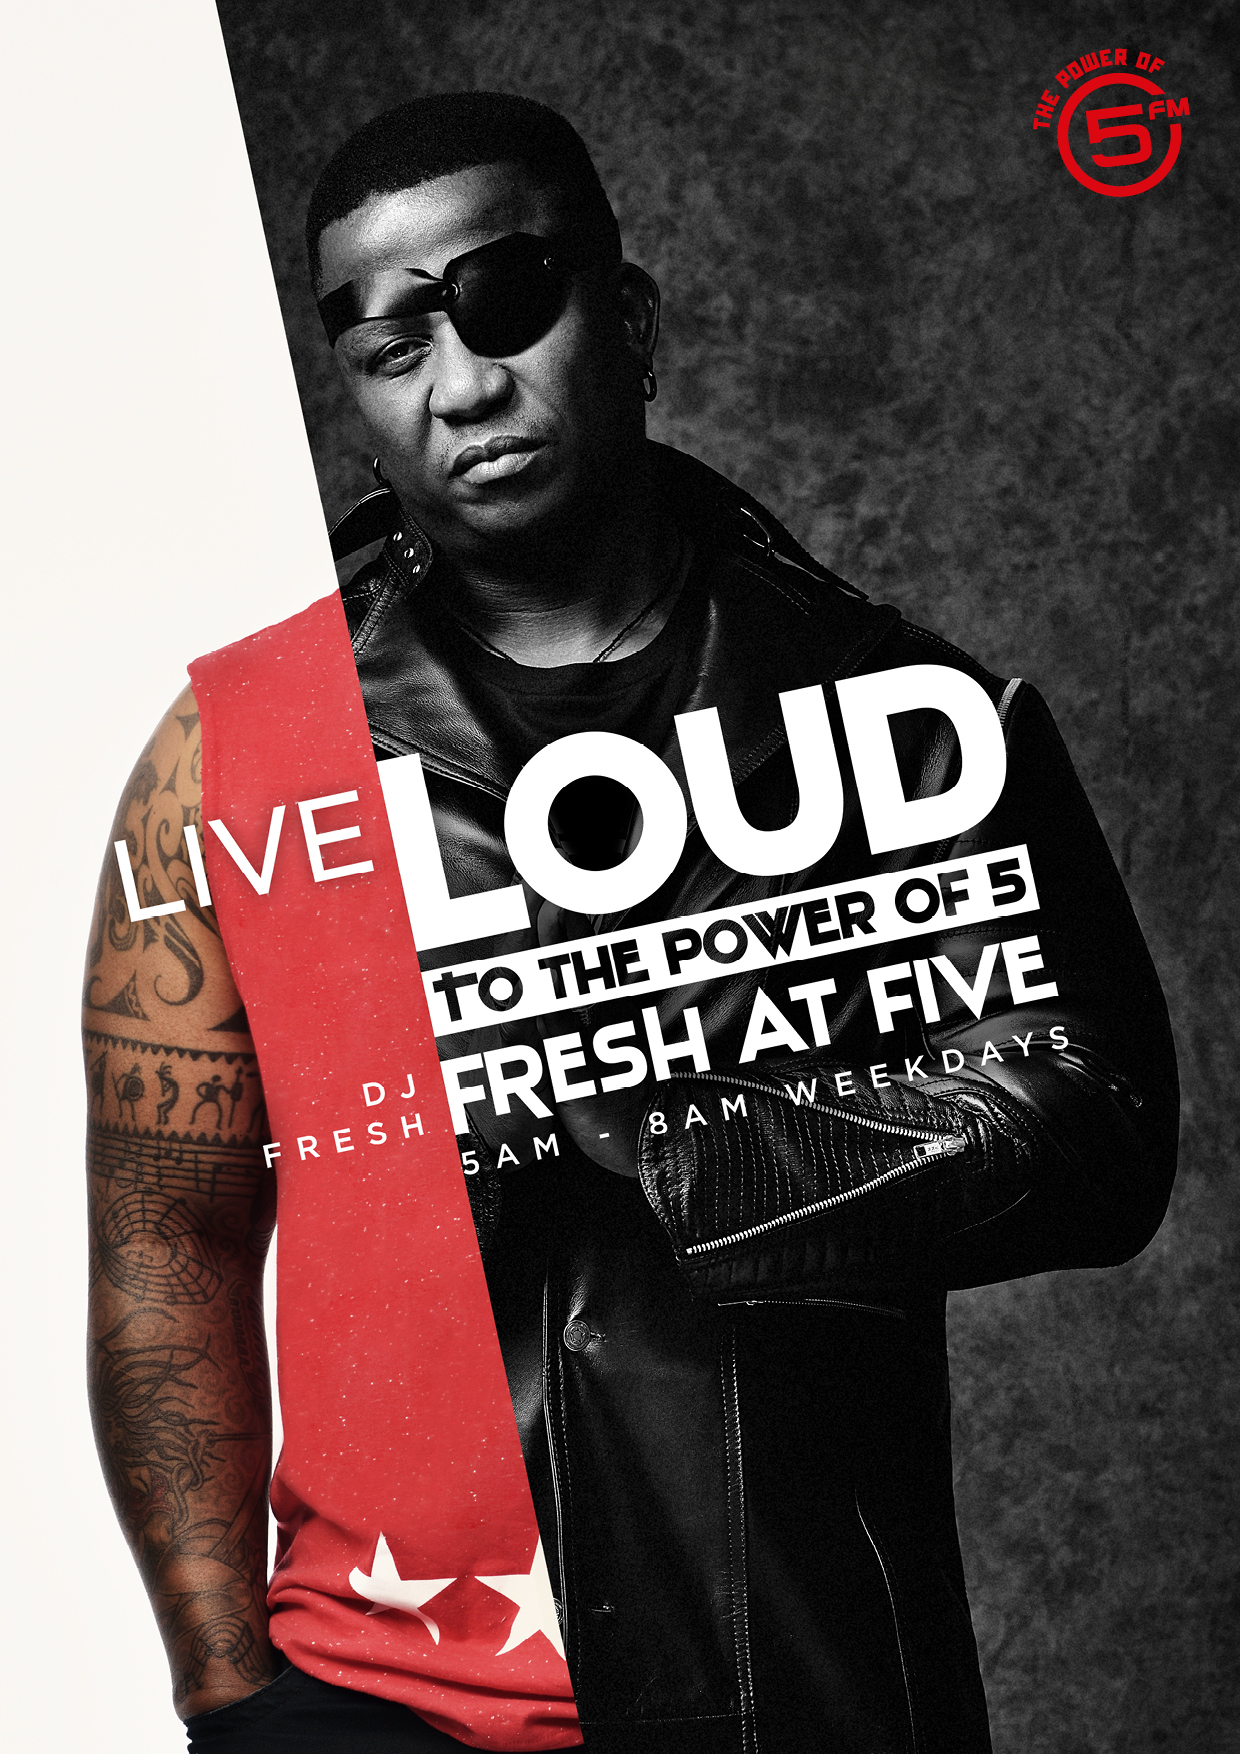 5FM - Live Loud Dj Line-up posters, outdoor and print executions.